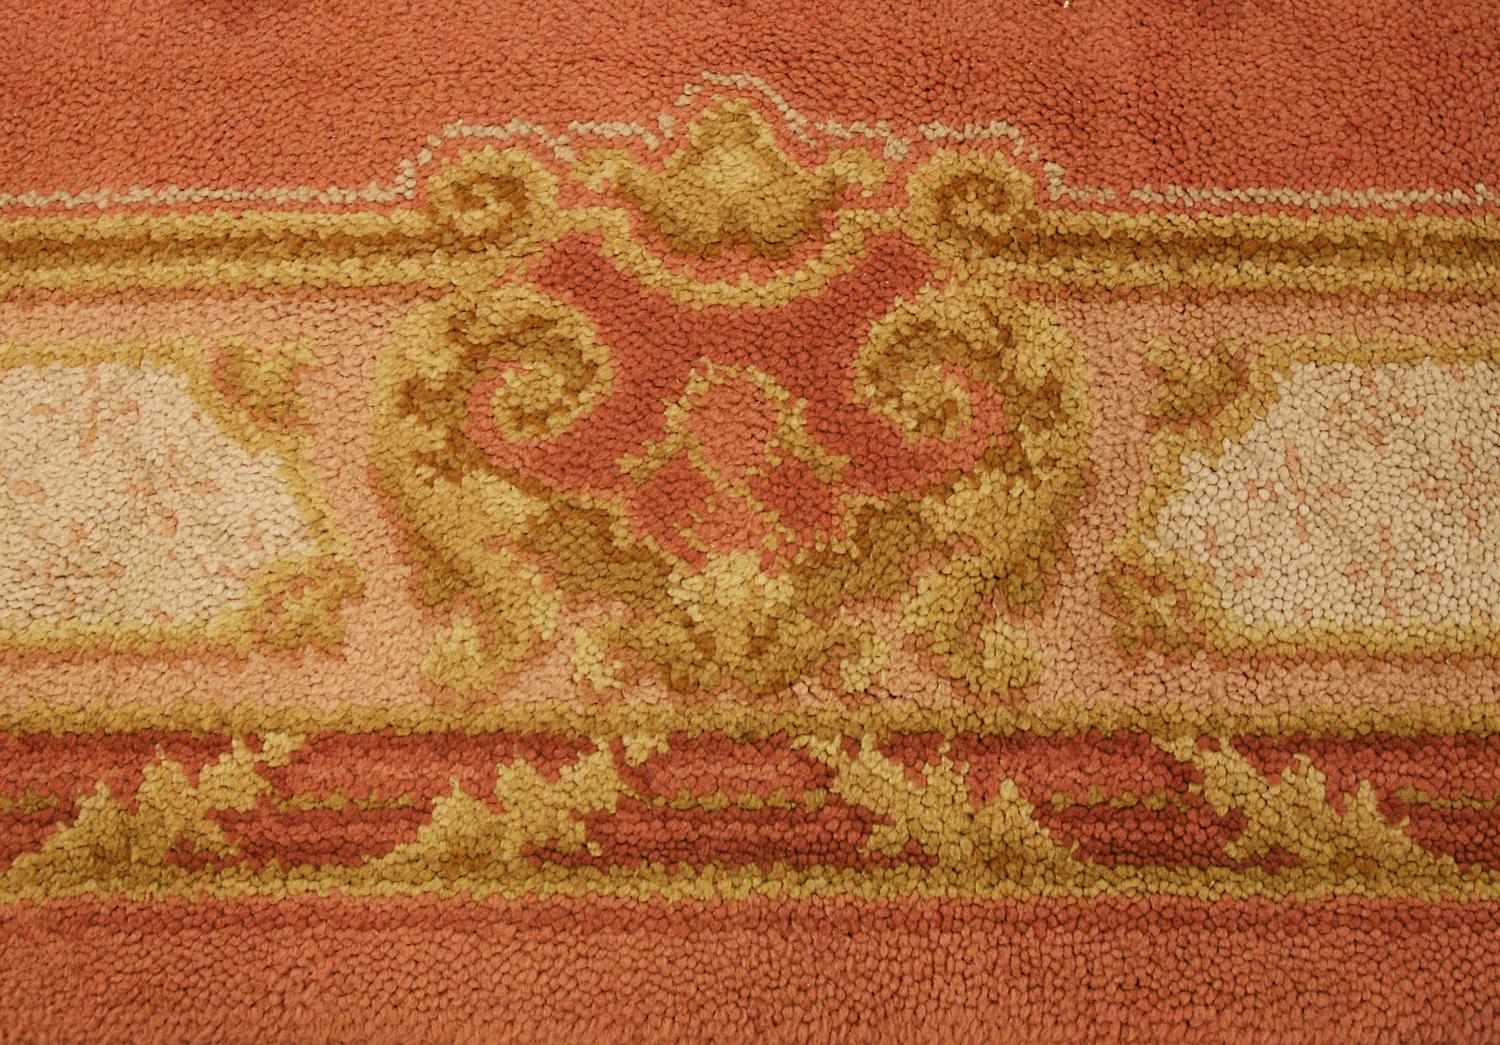 Northern Irish Antique English Donegal 'Art & Craft' Pink Field Wool Carpet, ca. 1920 For Sale